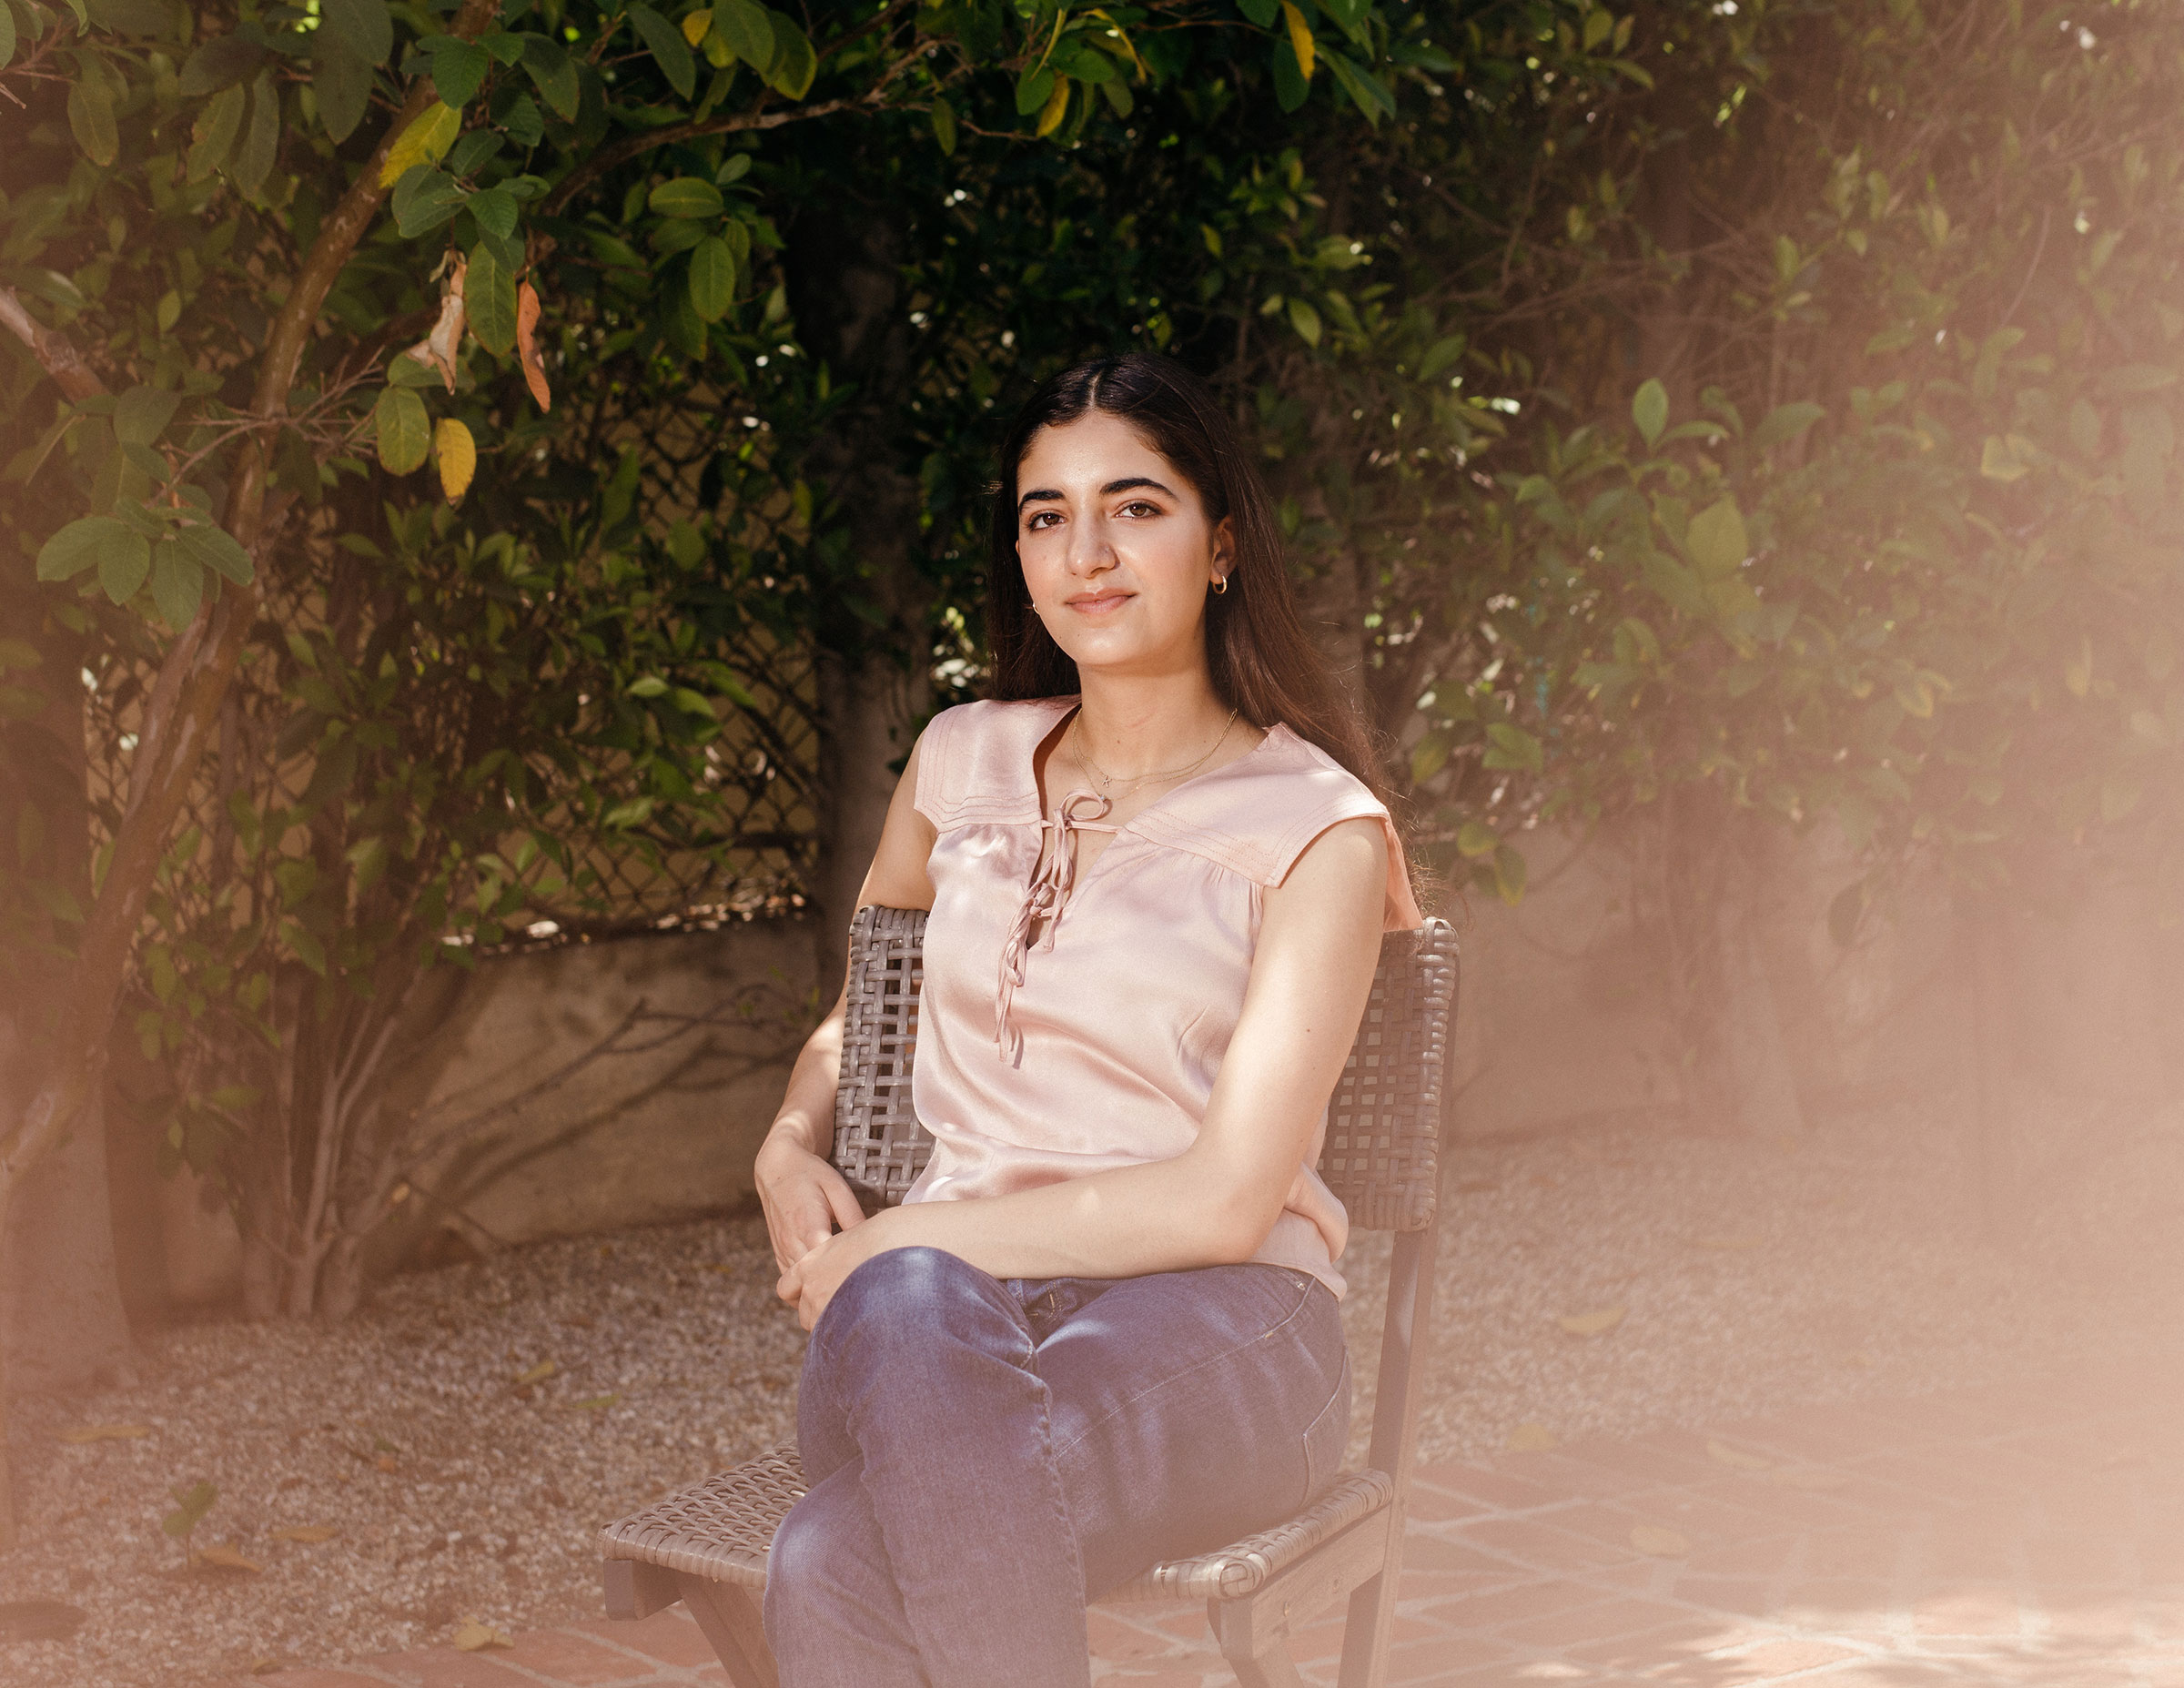 Kelly Danielpour, founder of the website VaxTeen.org, in Los Angeles, on June 16, 2021. (Jessica Pons—The New York Times/Redux)